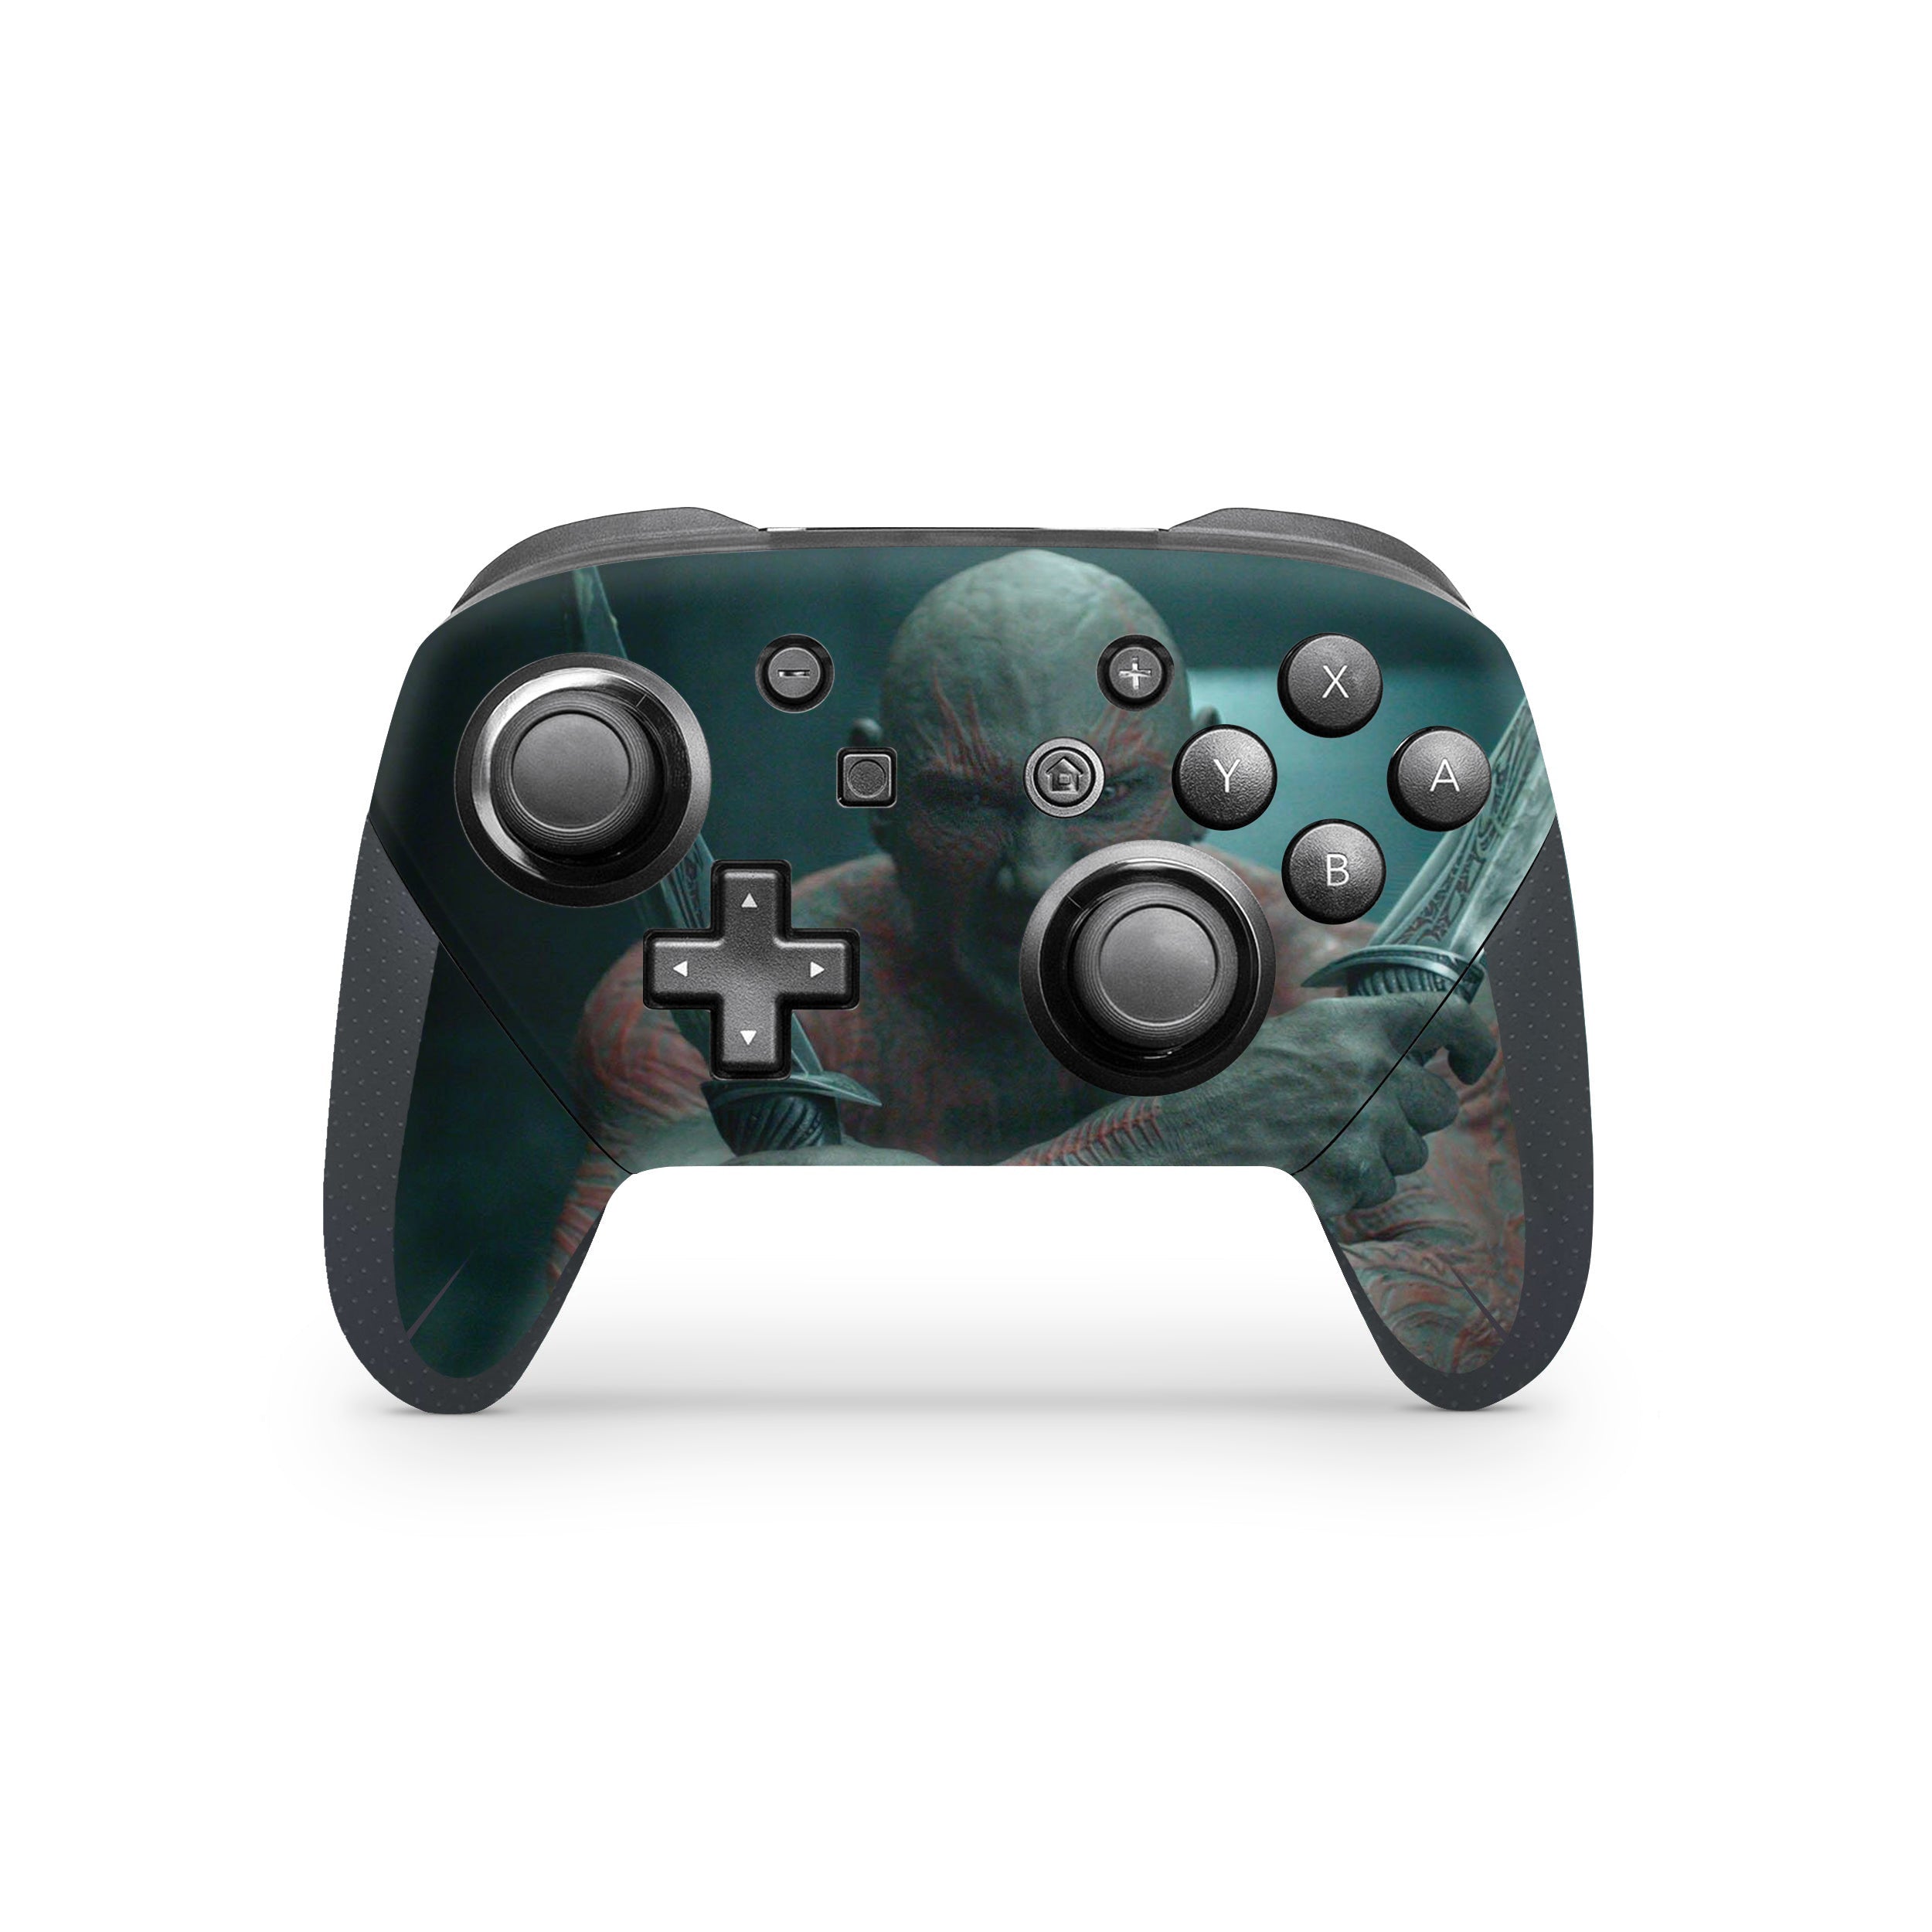 A video game skin featuring a Marvel Guardians of the Galaxy Drax design for the Switch Pro Controller.